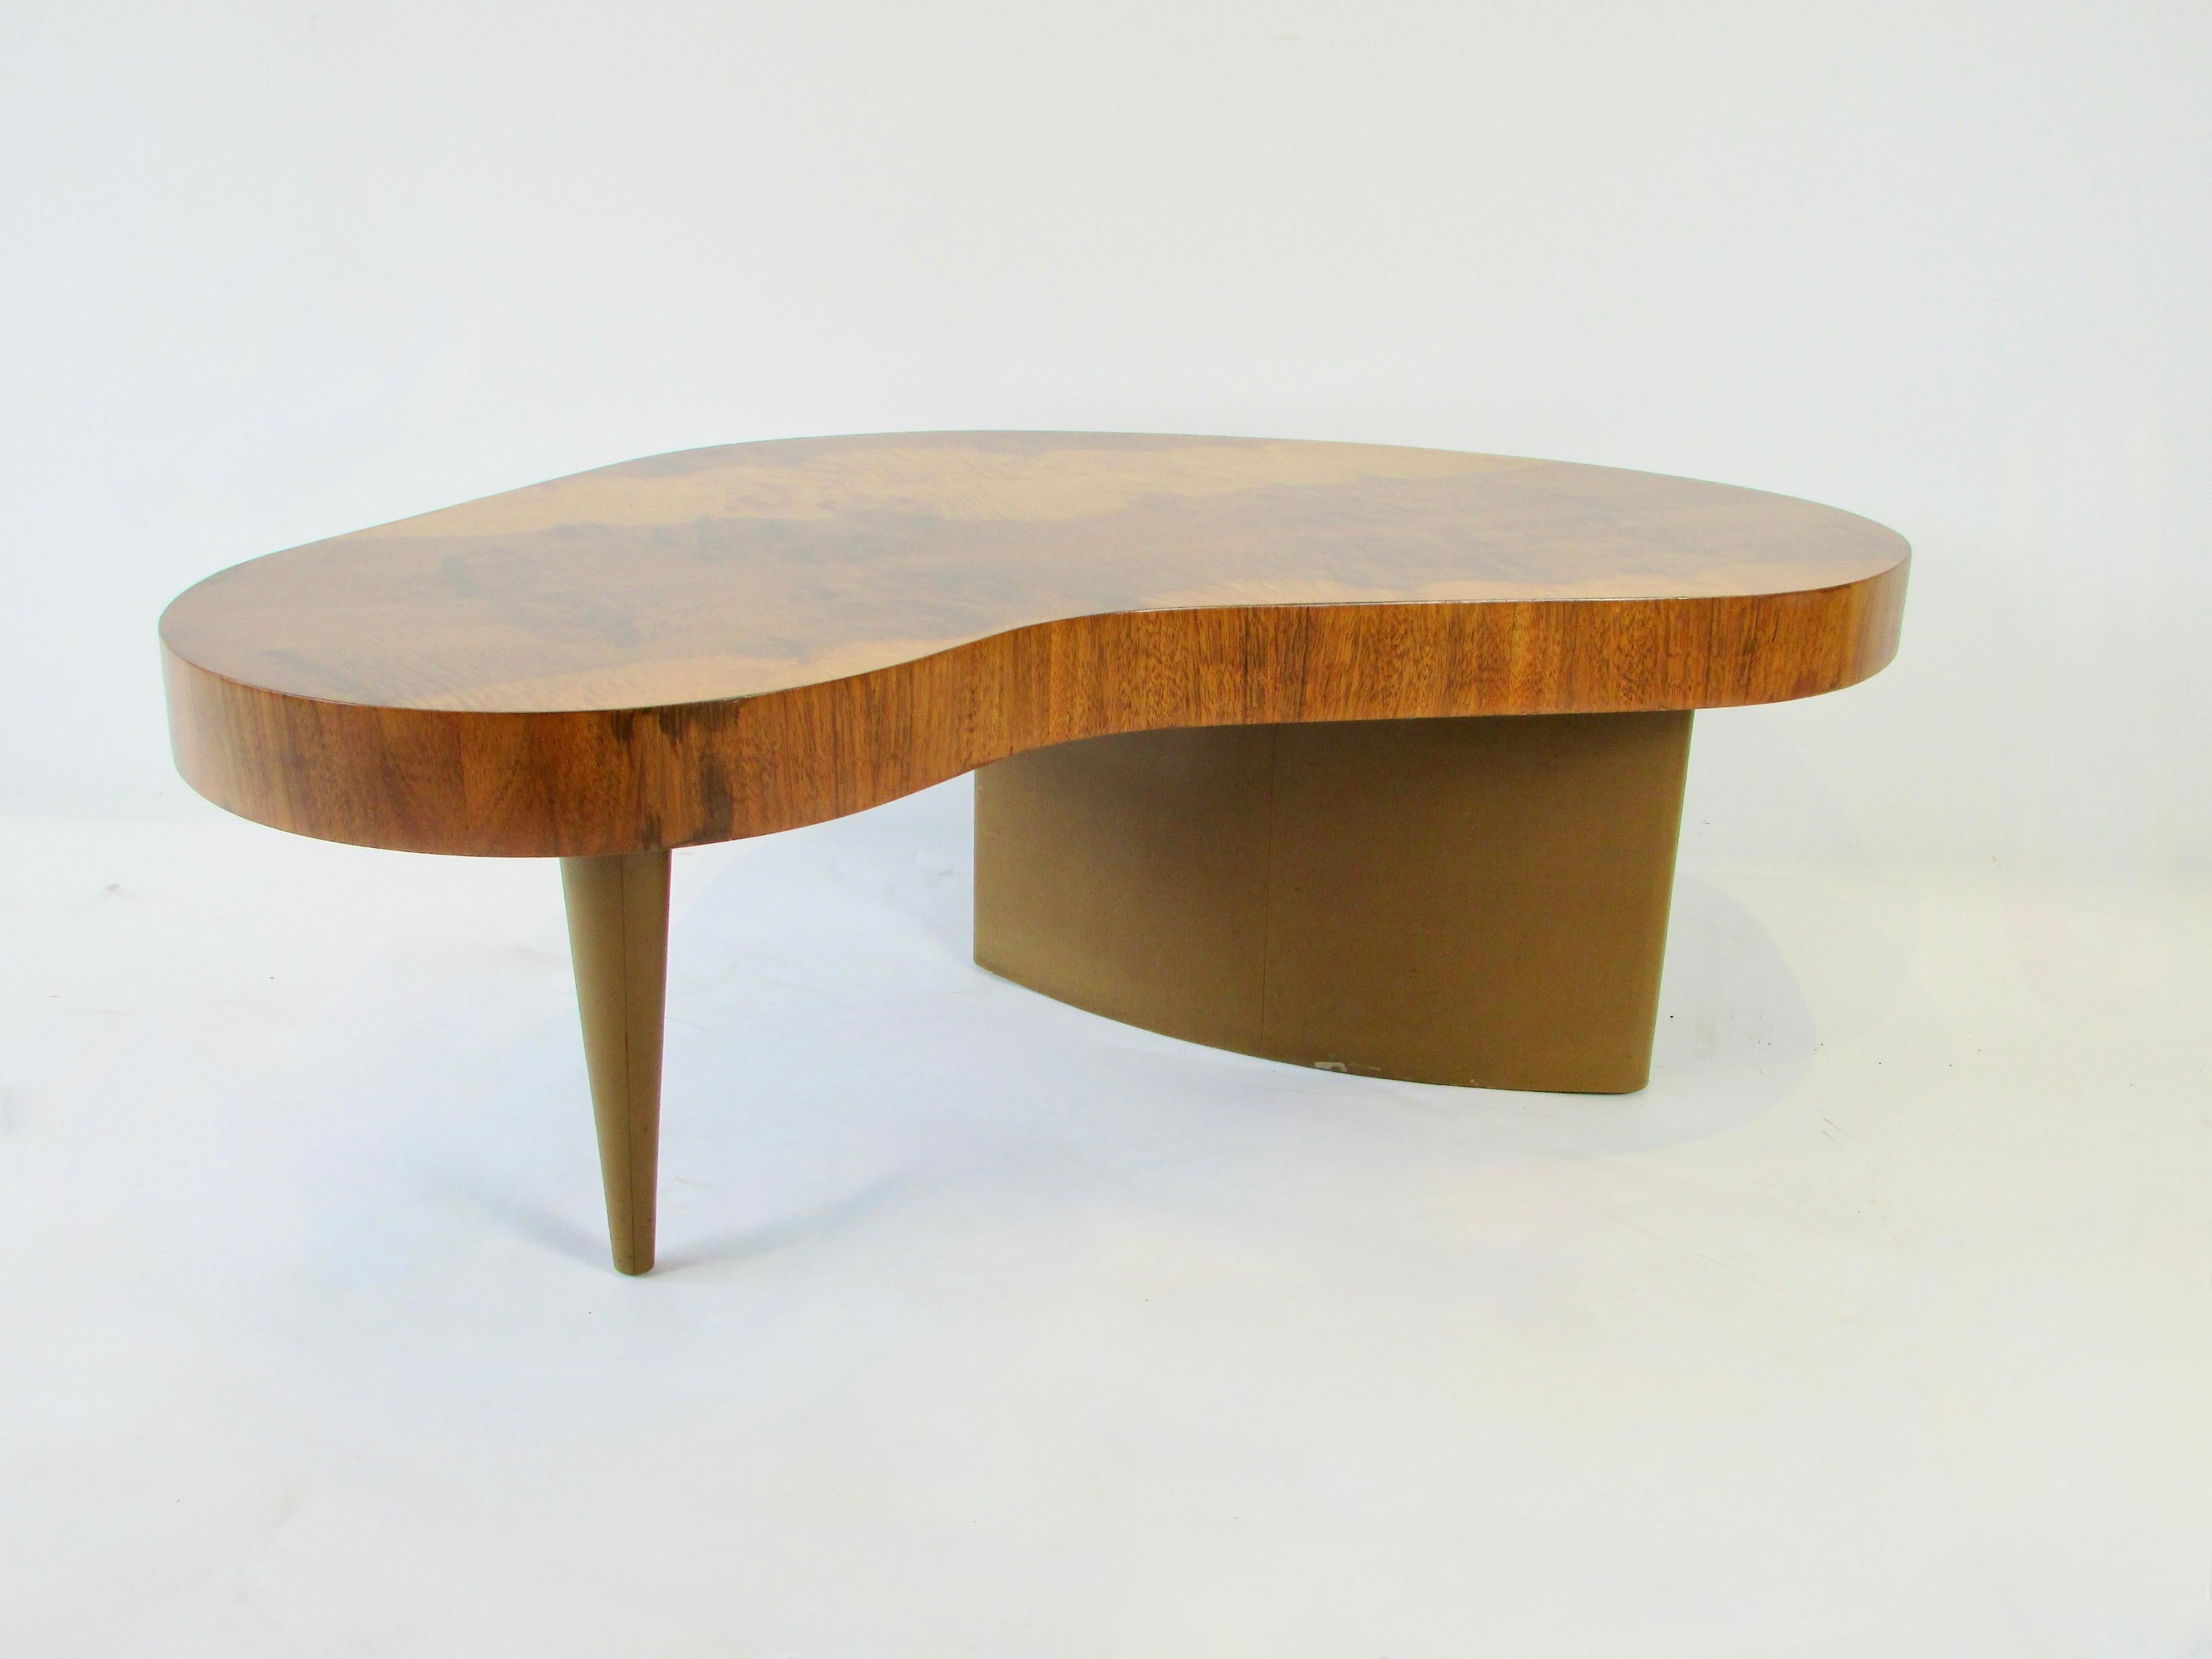 Classic Art Deco or Art Moderne coffee - cocktail table. Designed by Gilbert Rohde one of the earliest proponents of American Modern design. Basically the man that brought Modern industrial design to Herman Miller in the mid 1930s. This stunning